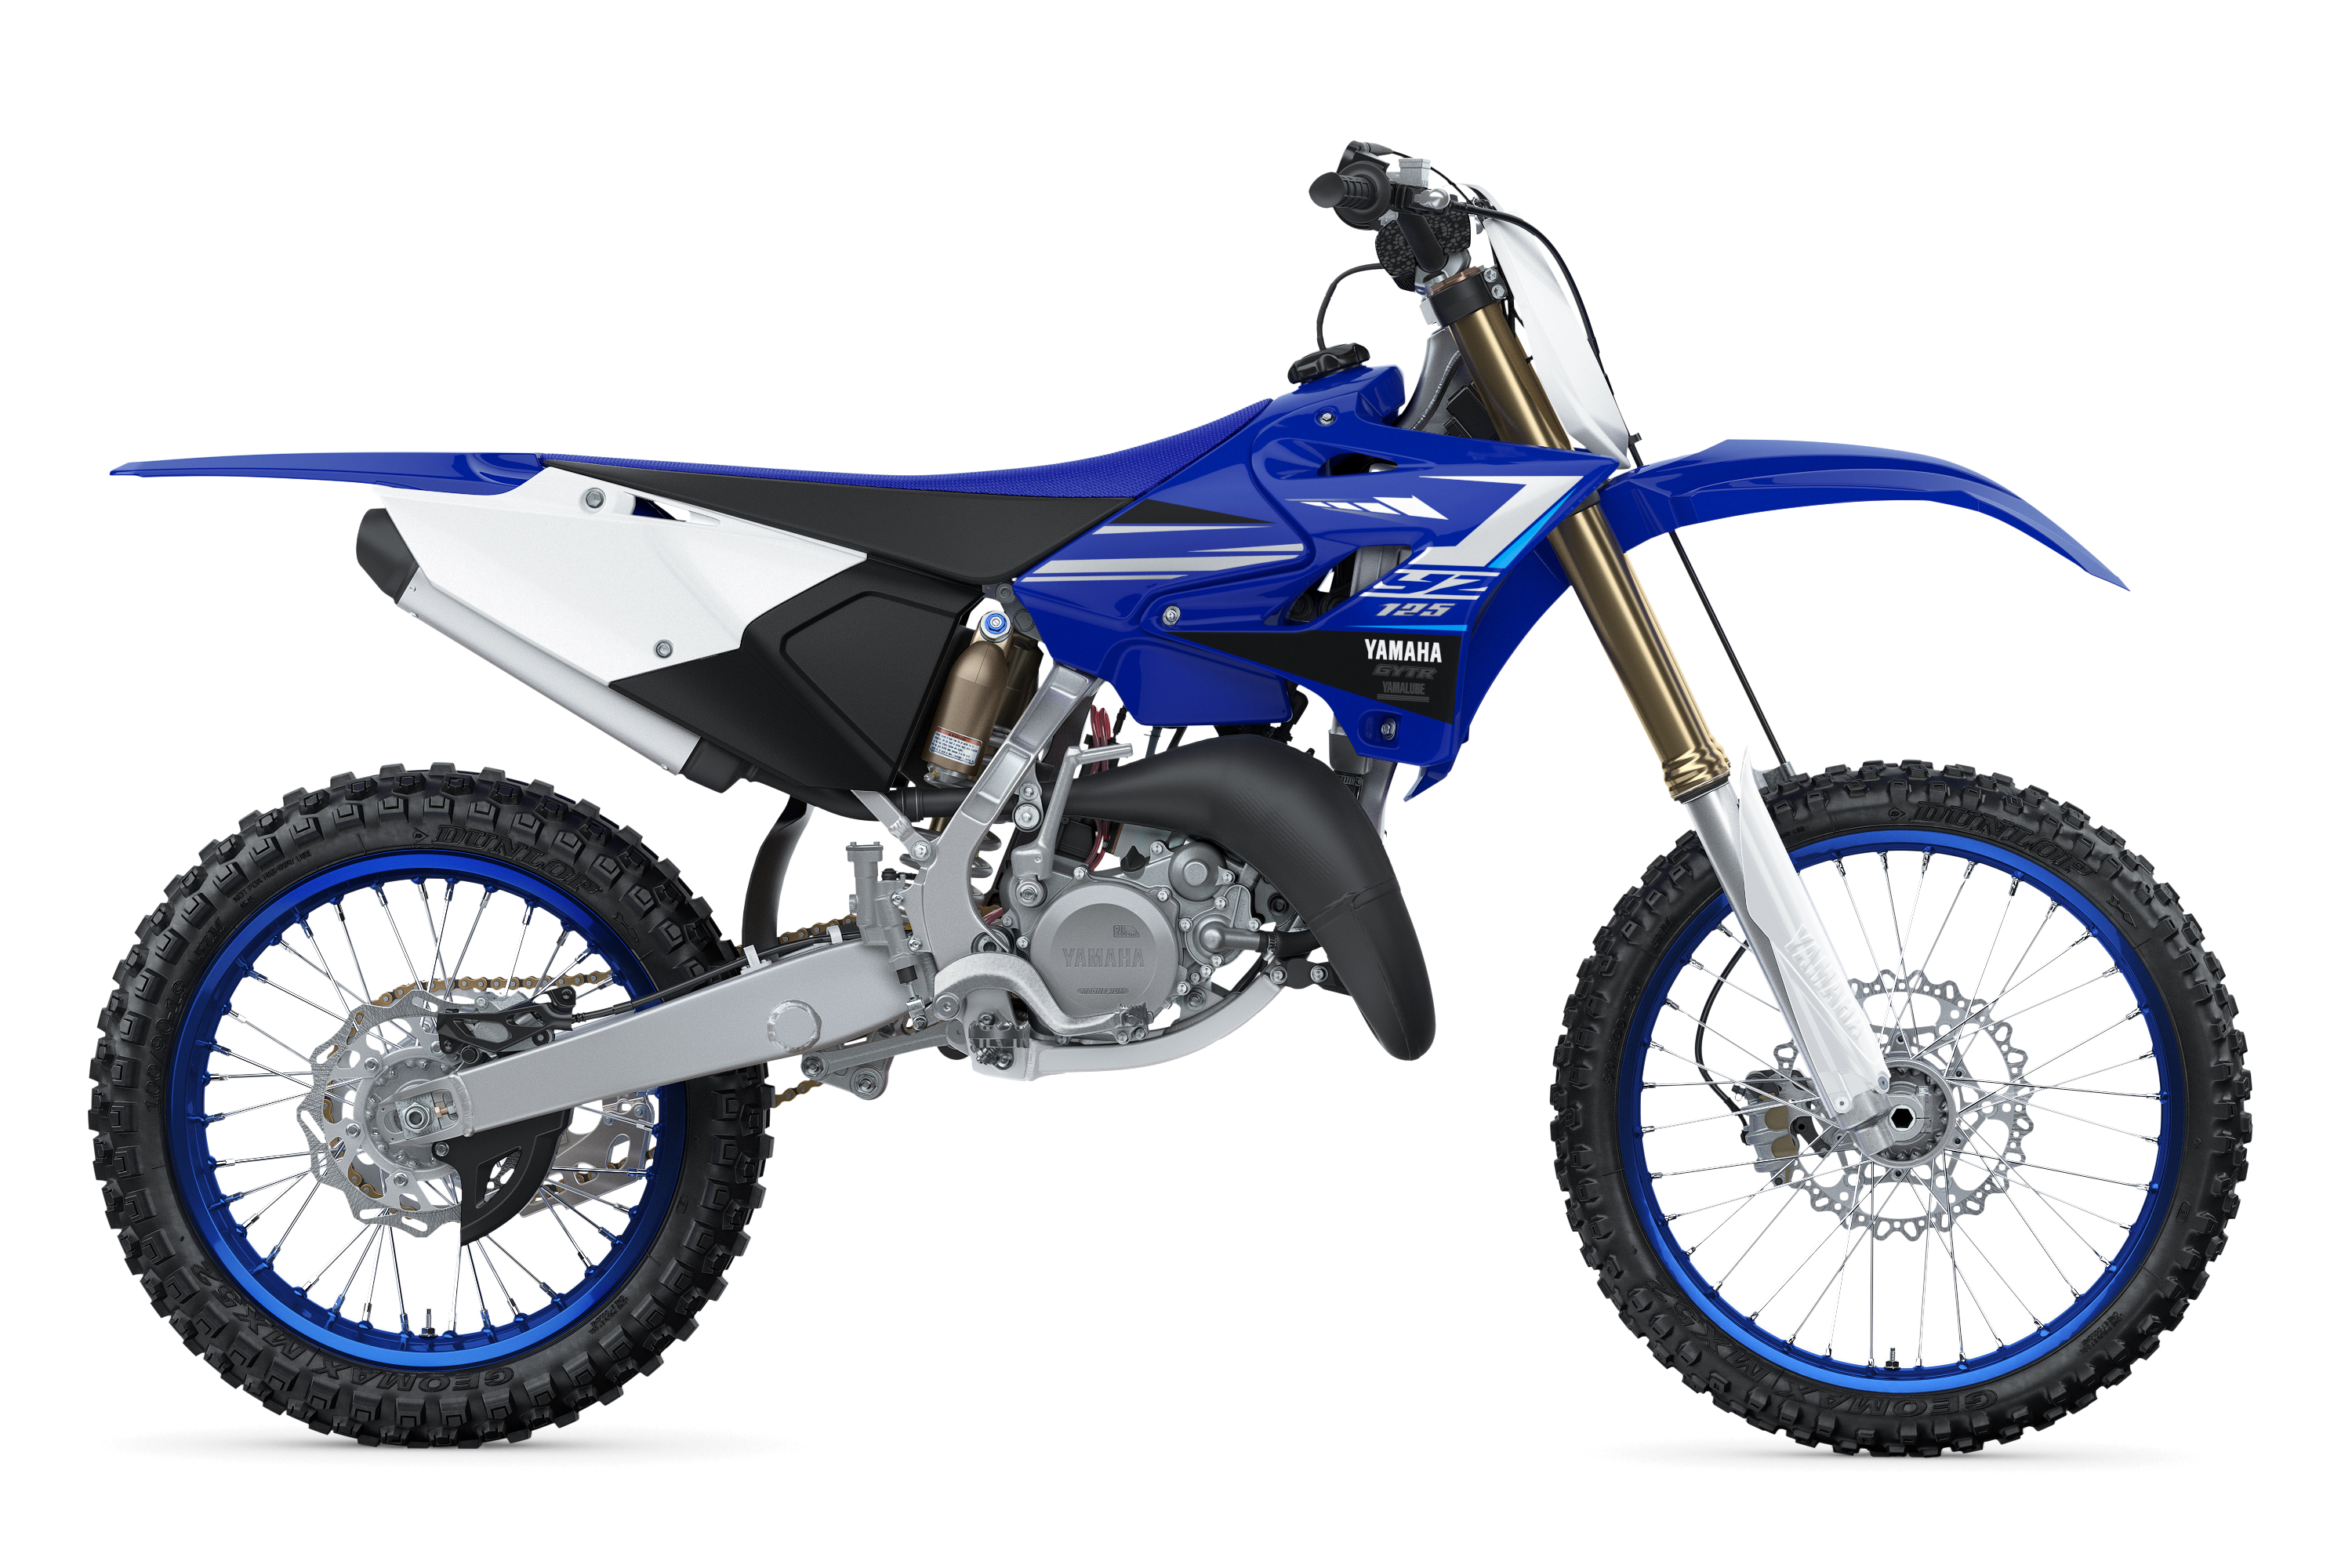 2020 Yamaha YZ125 Buyer's Guide: Specs, Photos, Price | Cycle World